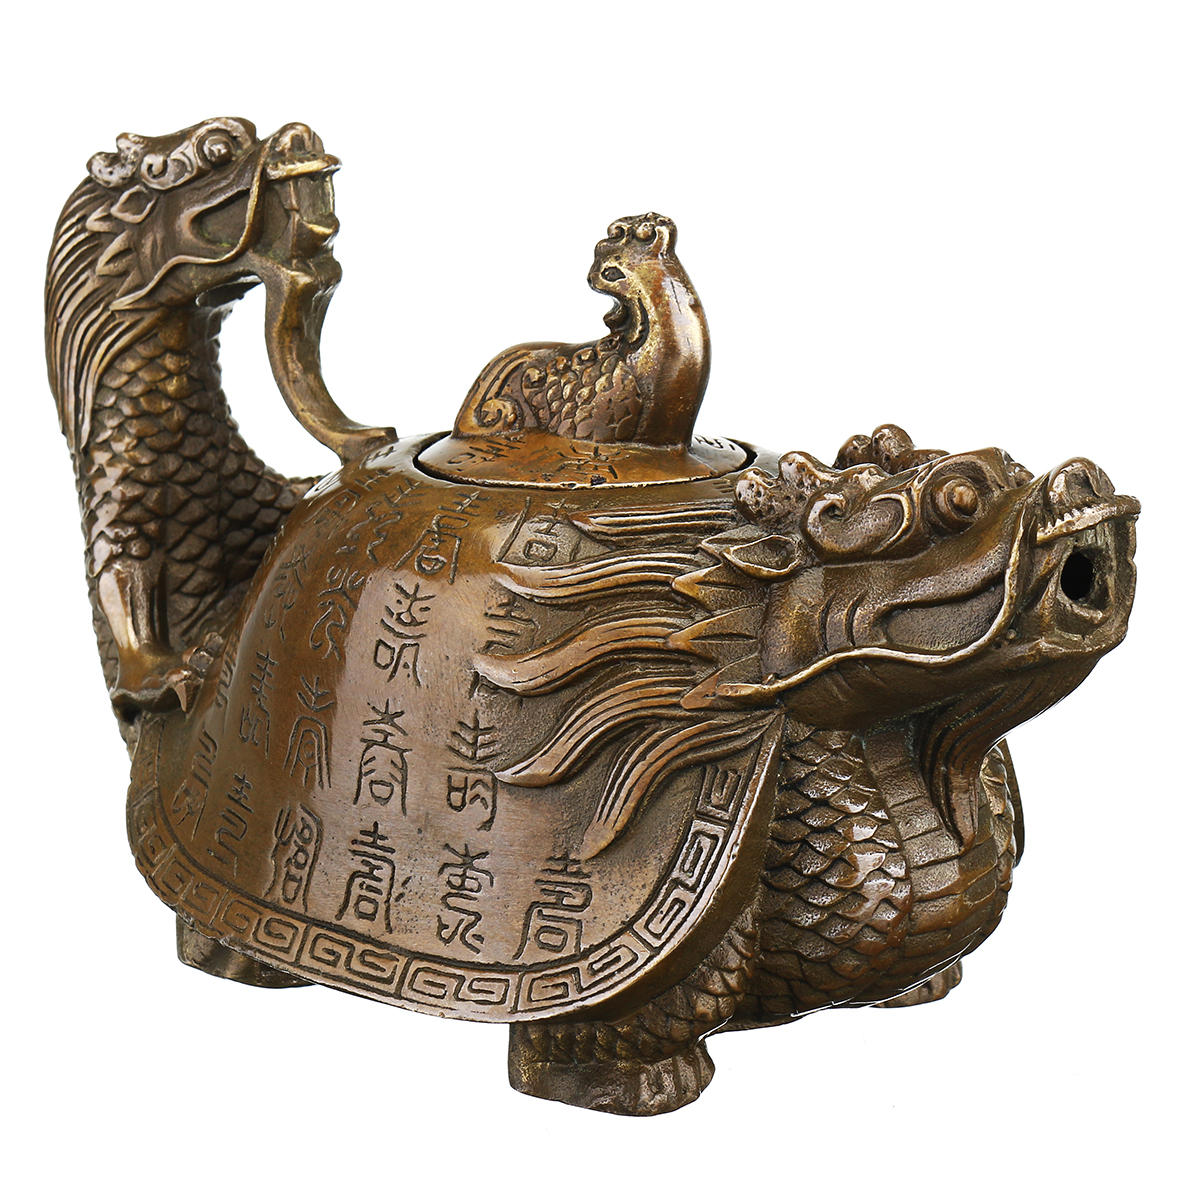 Chinese Old copper handmade Wealth elephant Home decoration